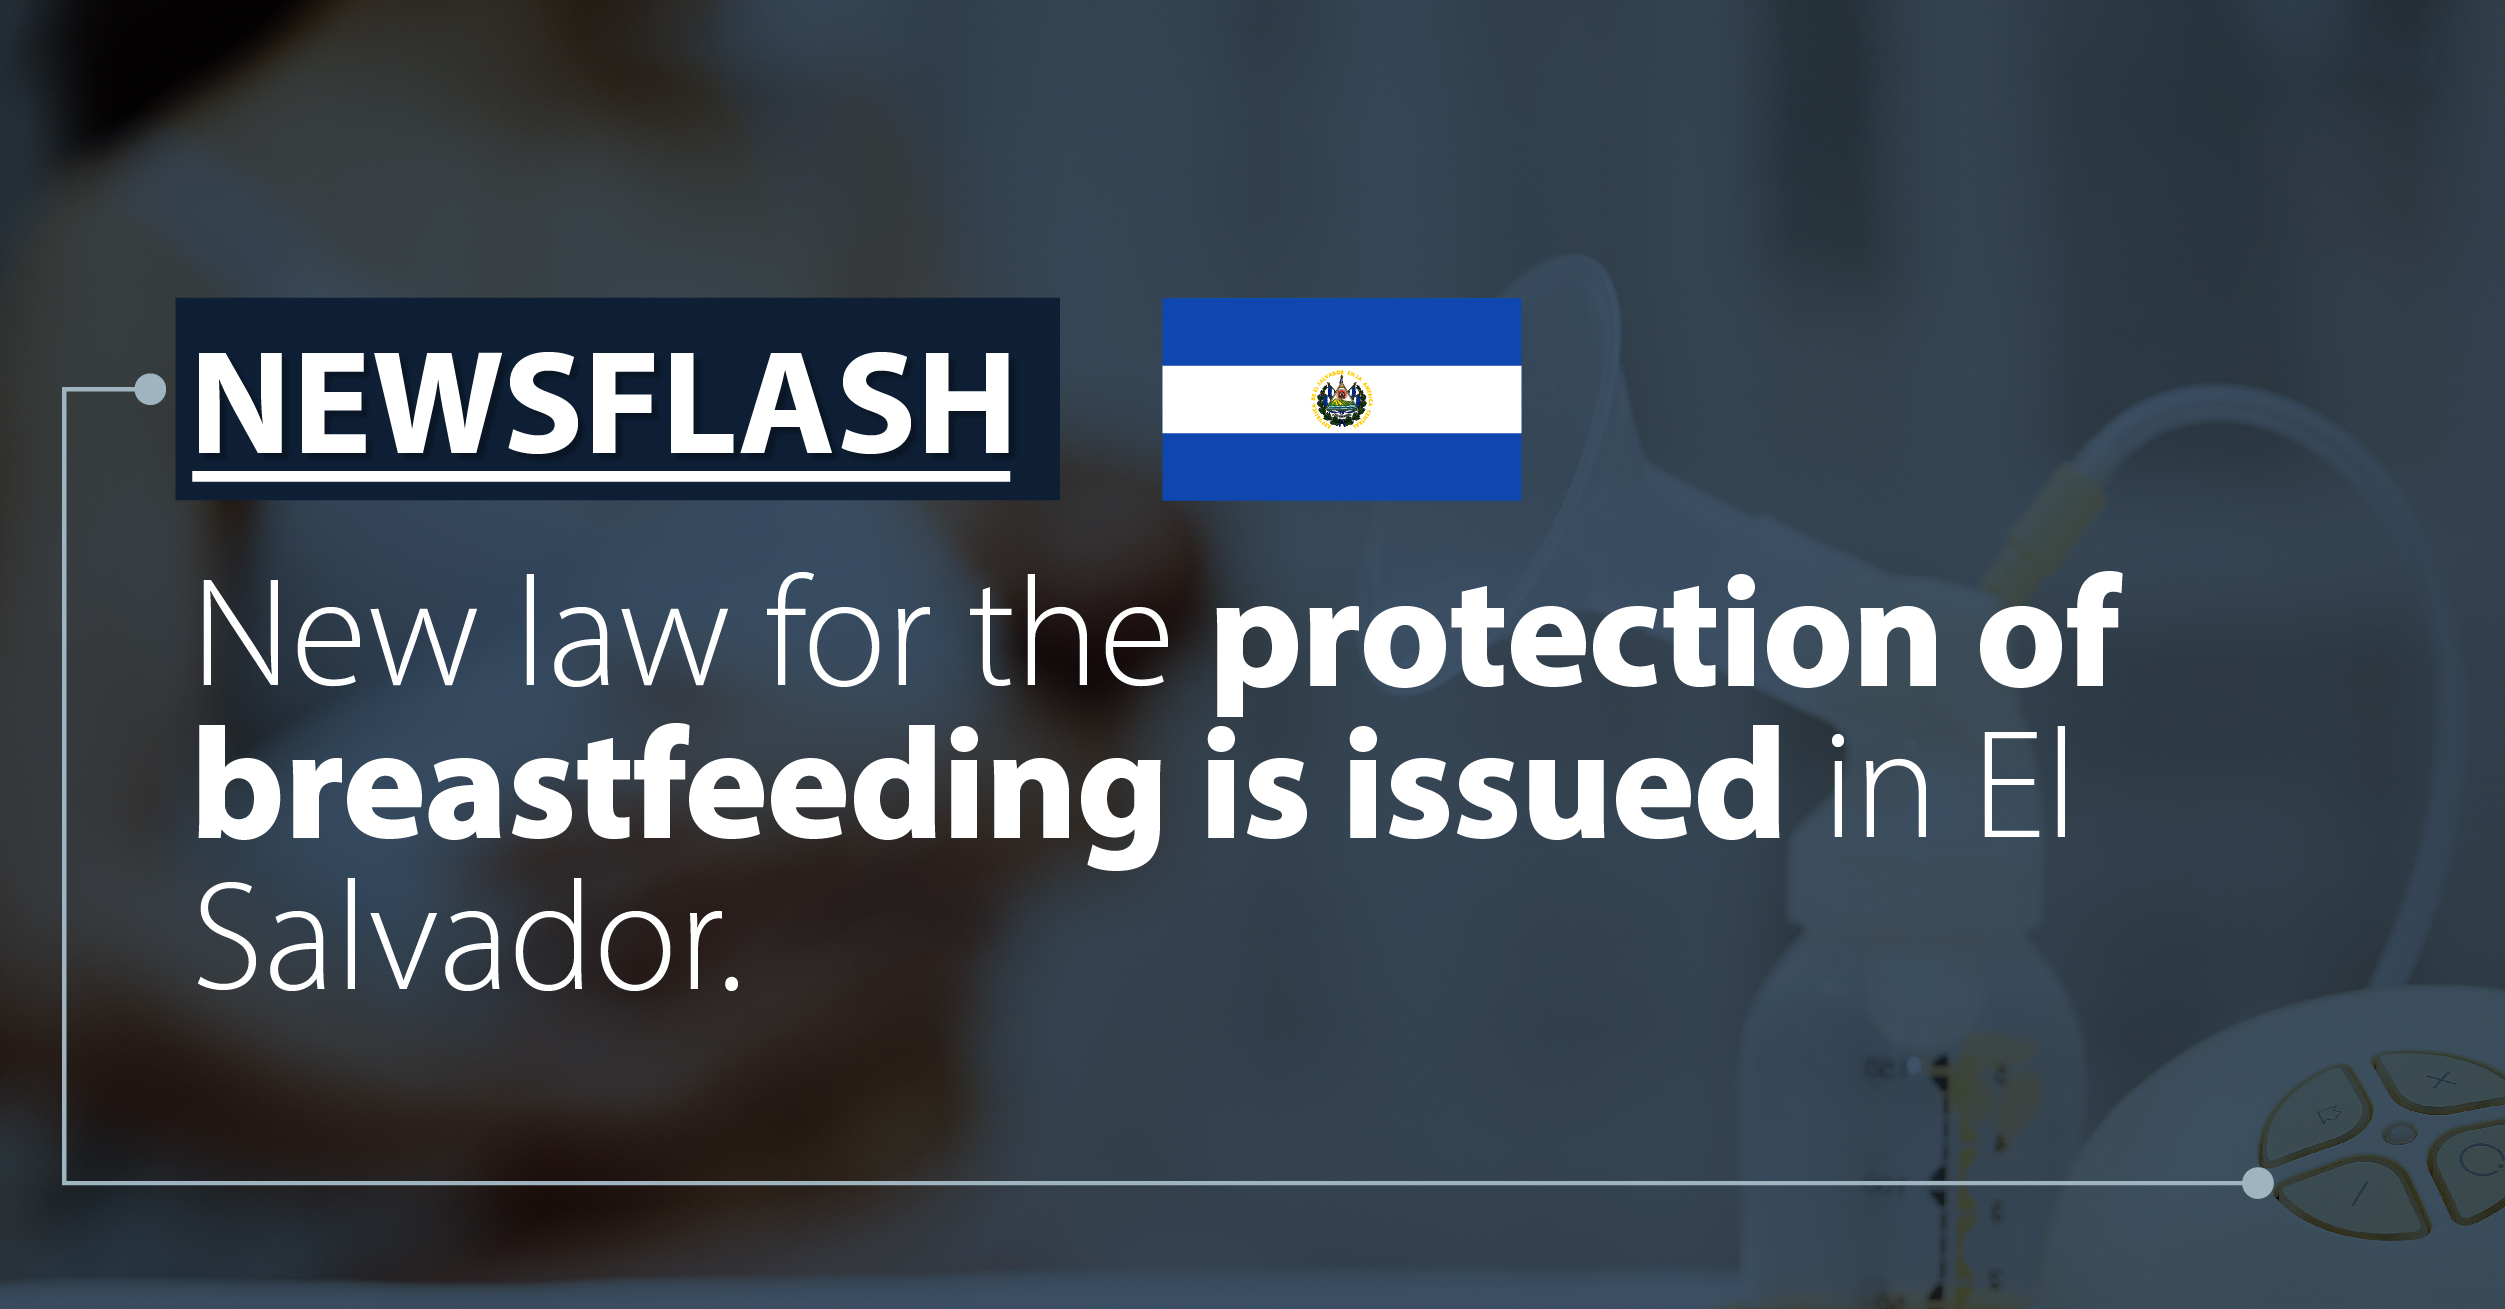 New law for the protection of breastfeeding is issued in El Salvador